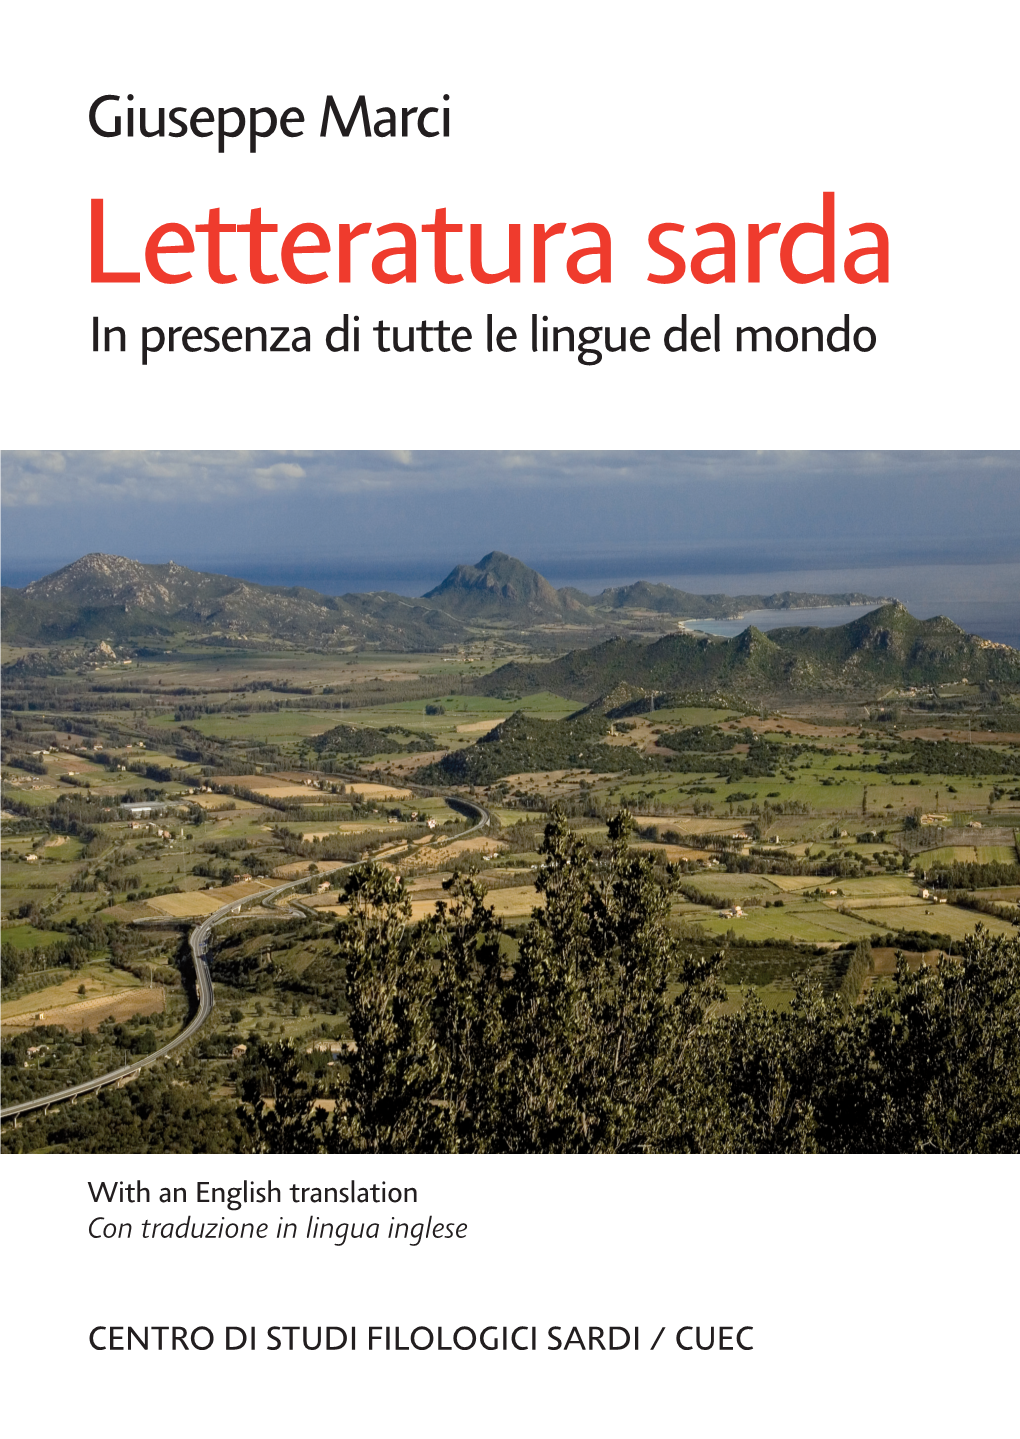 Letteratura Sarda Editor-In-Chief of the Journal “Nae